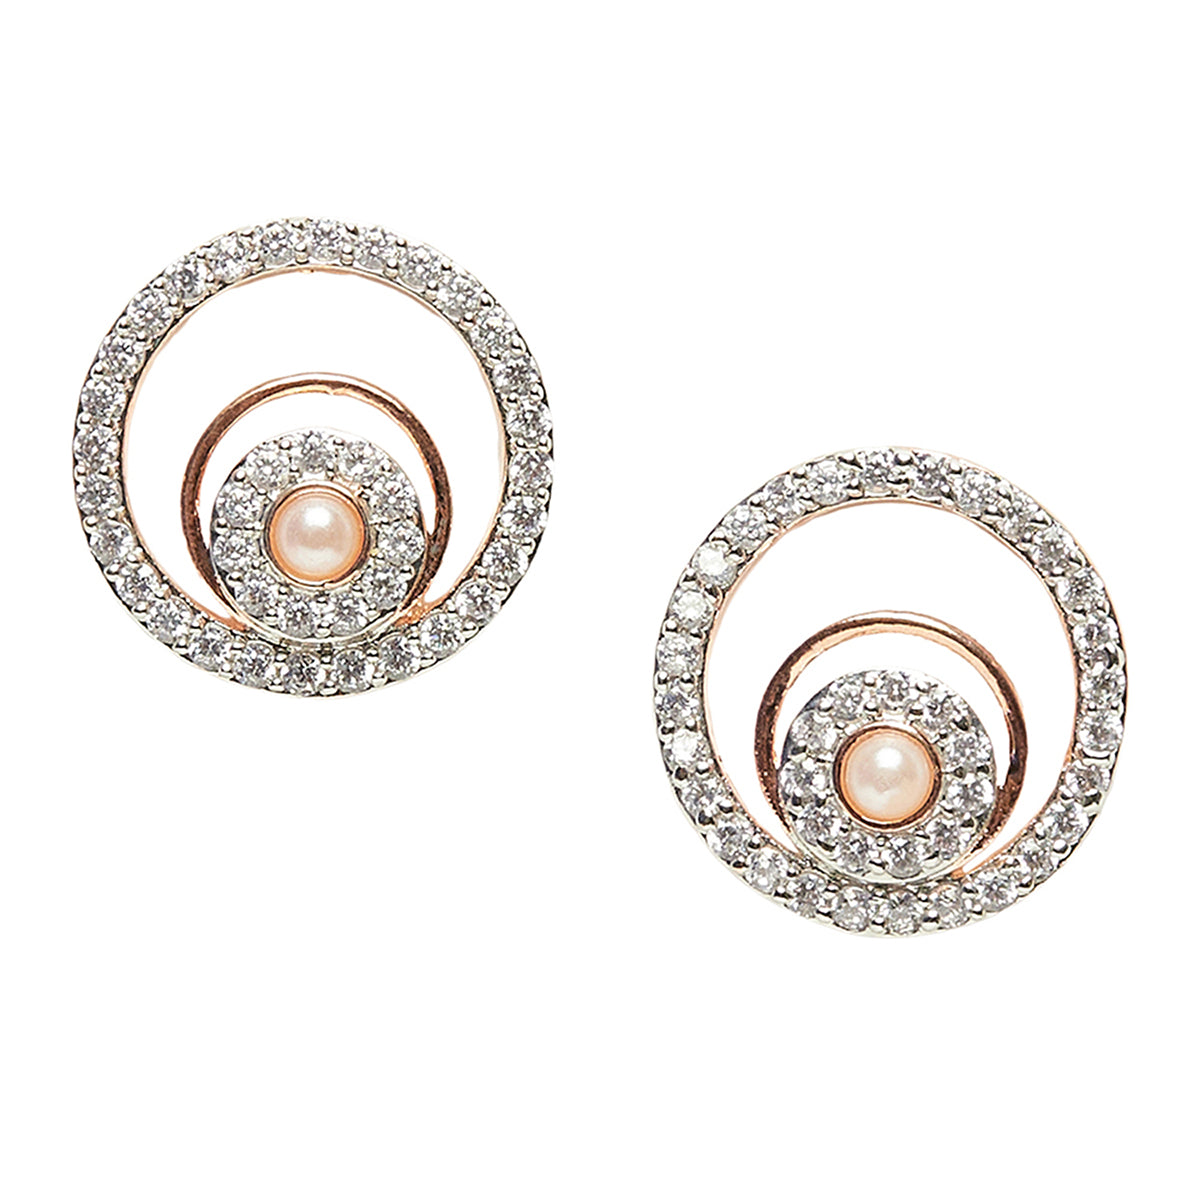 Pearly Whites Designer Statement Earrings